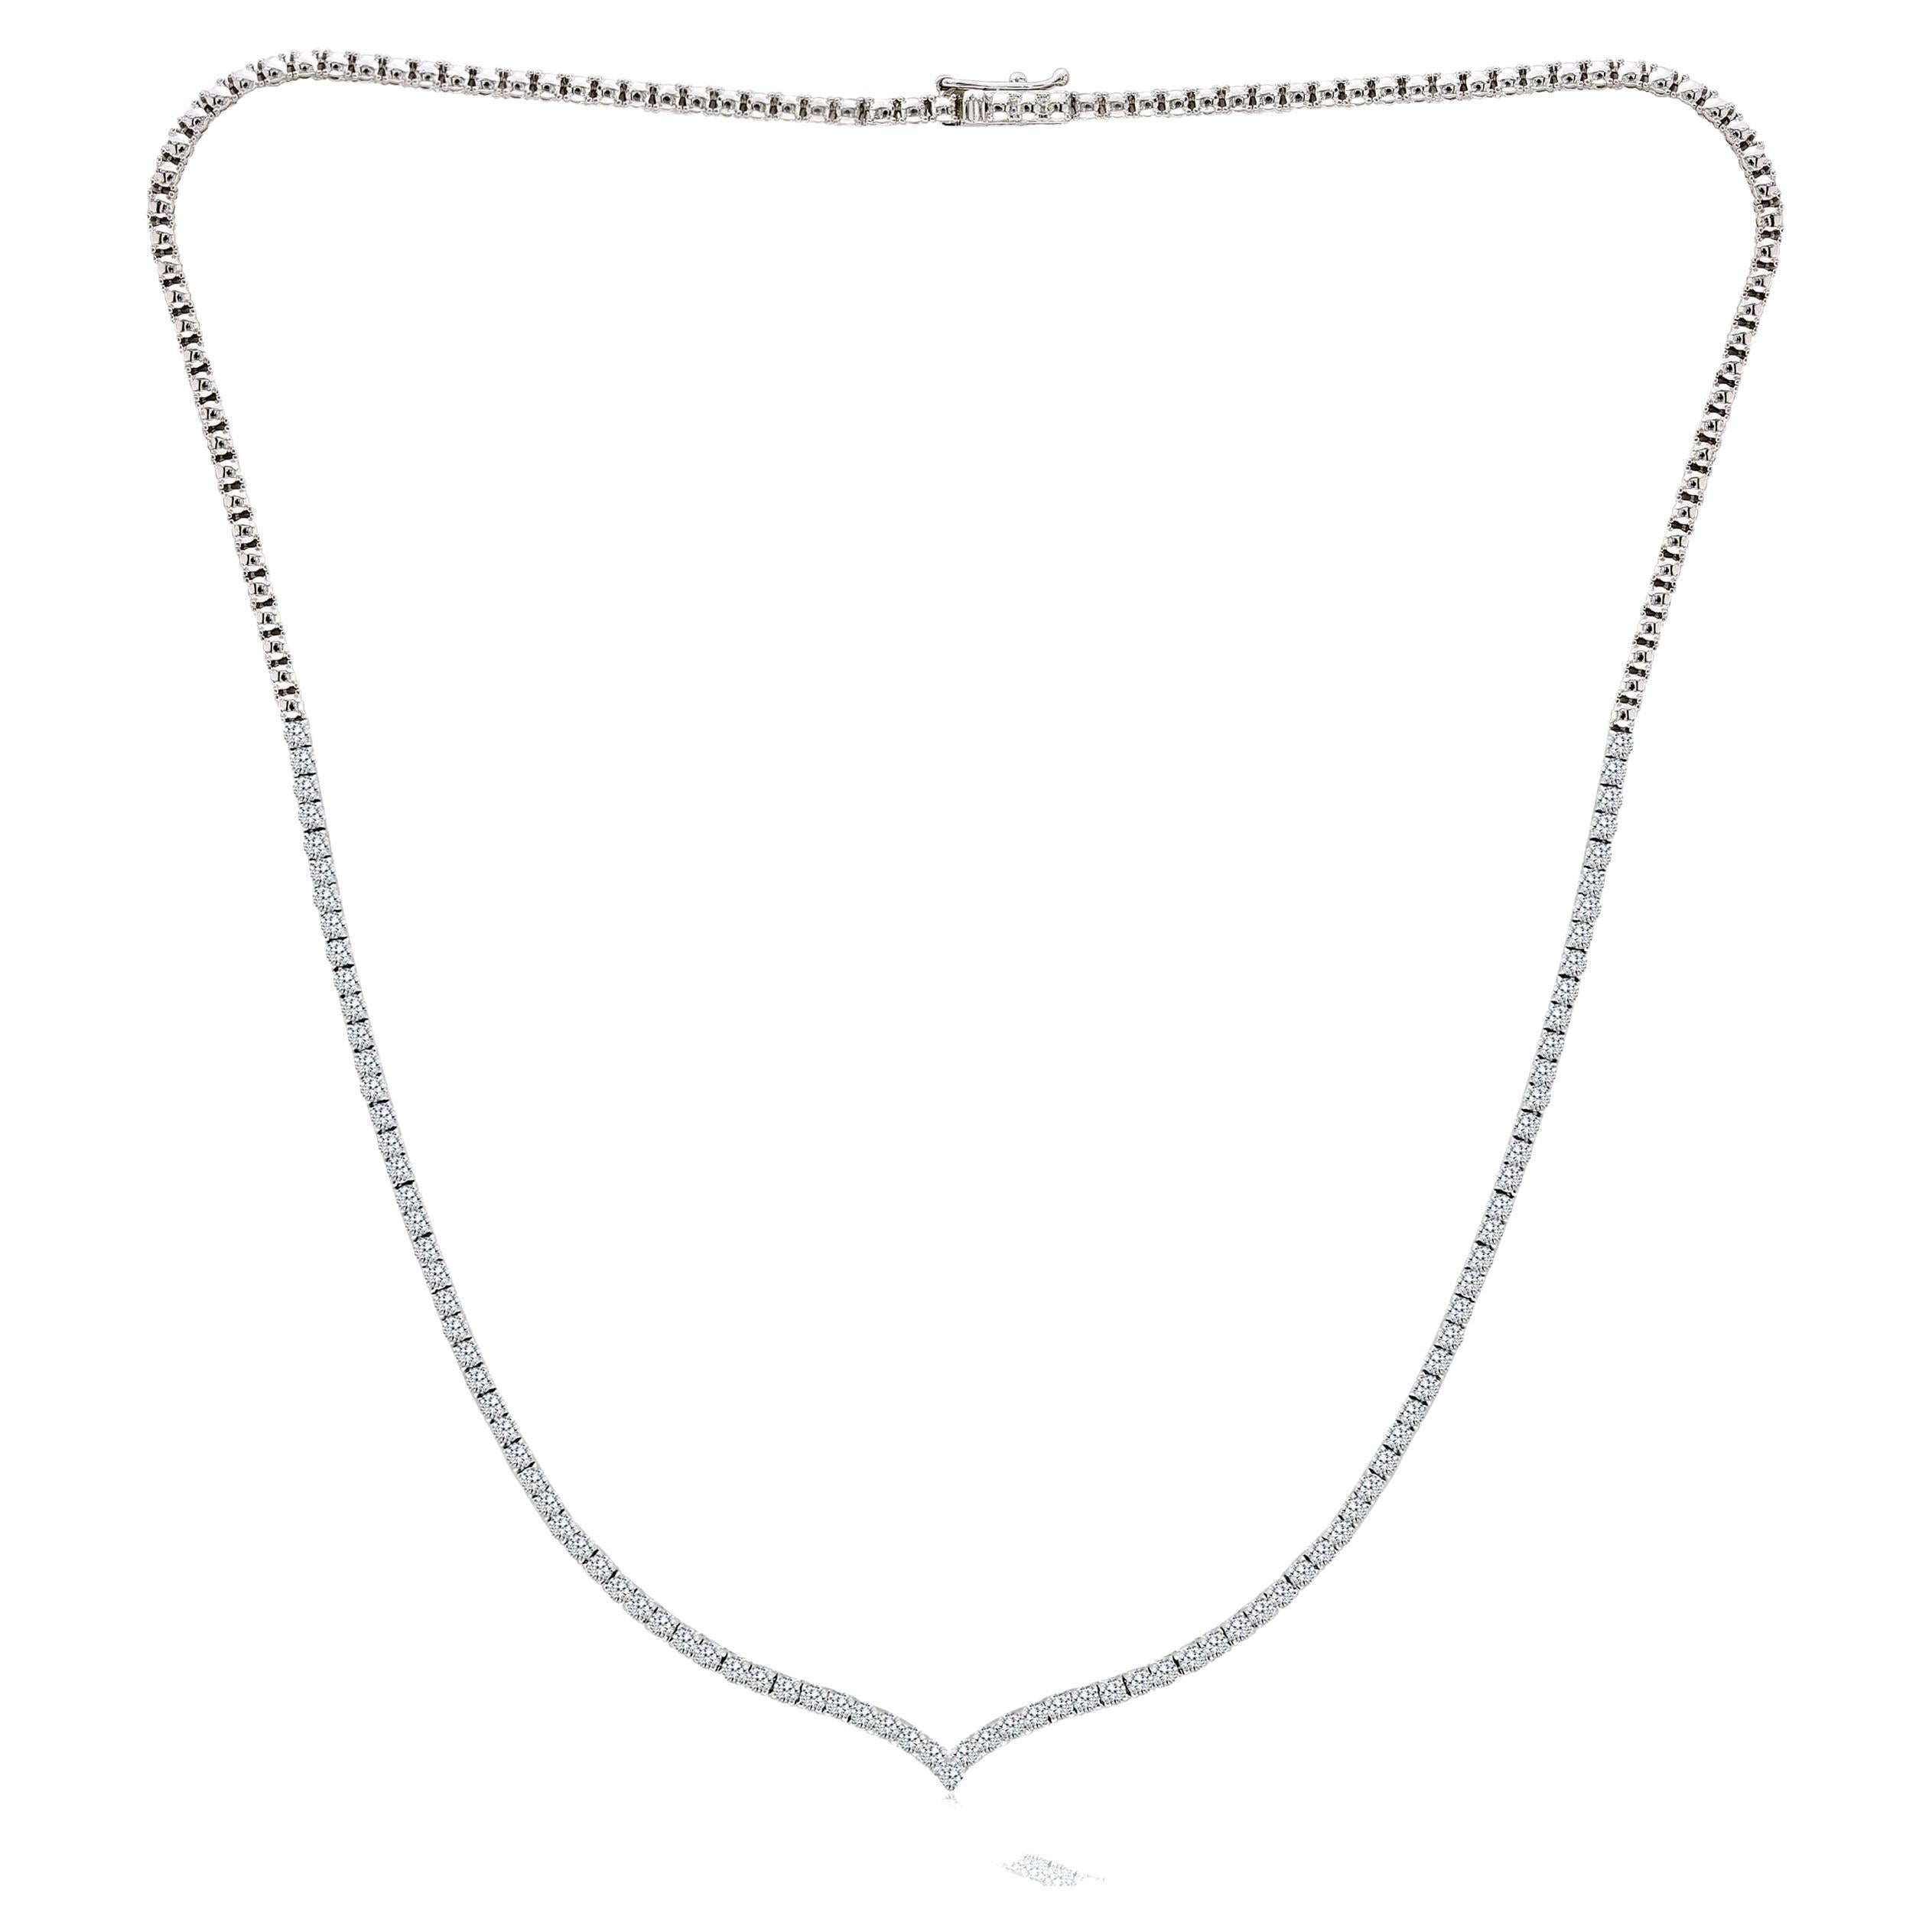 3 Carat Diamond Tennis Necklace in 14K White Gold For Sale